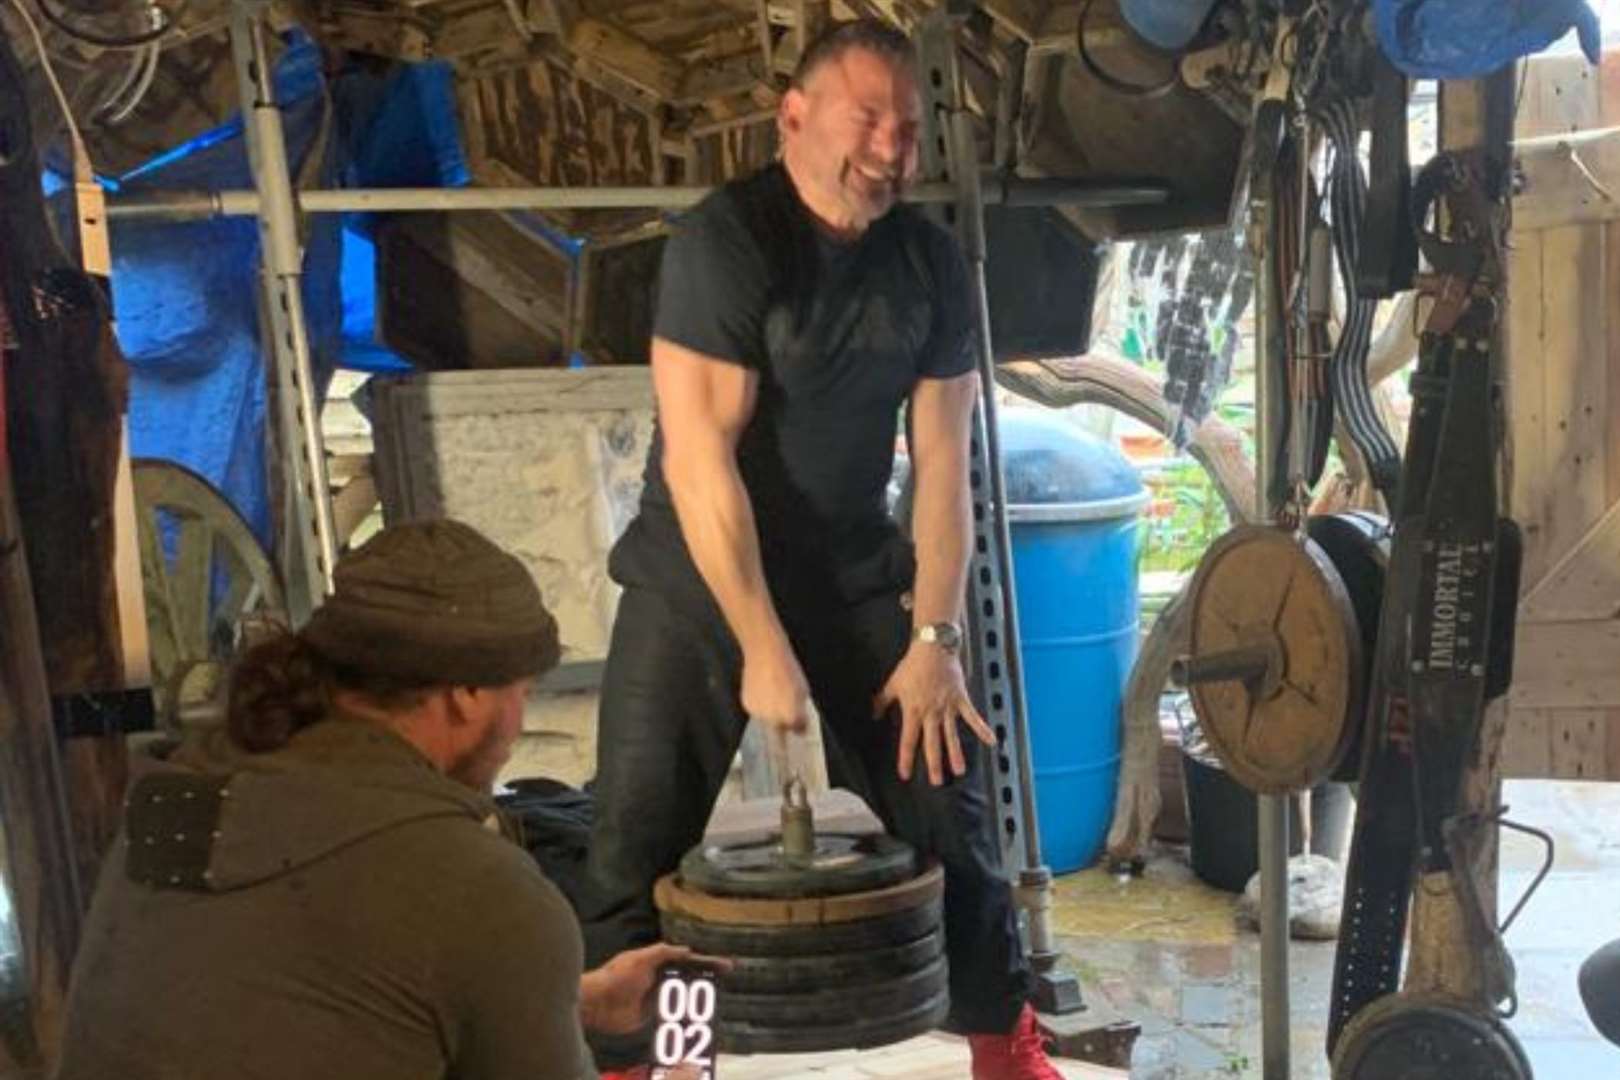 He managed to lift 129.5kg with just one finger